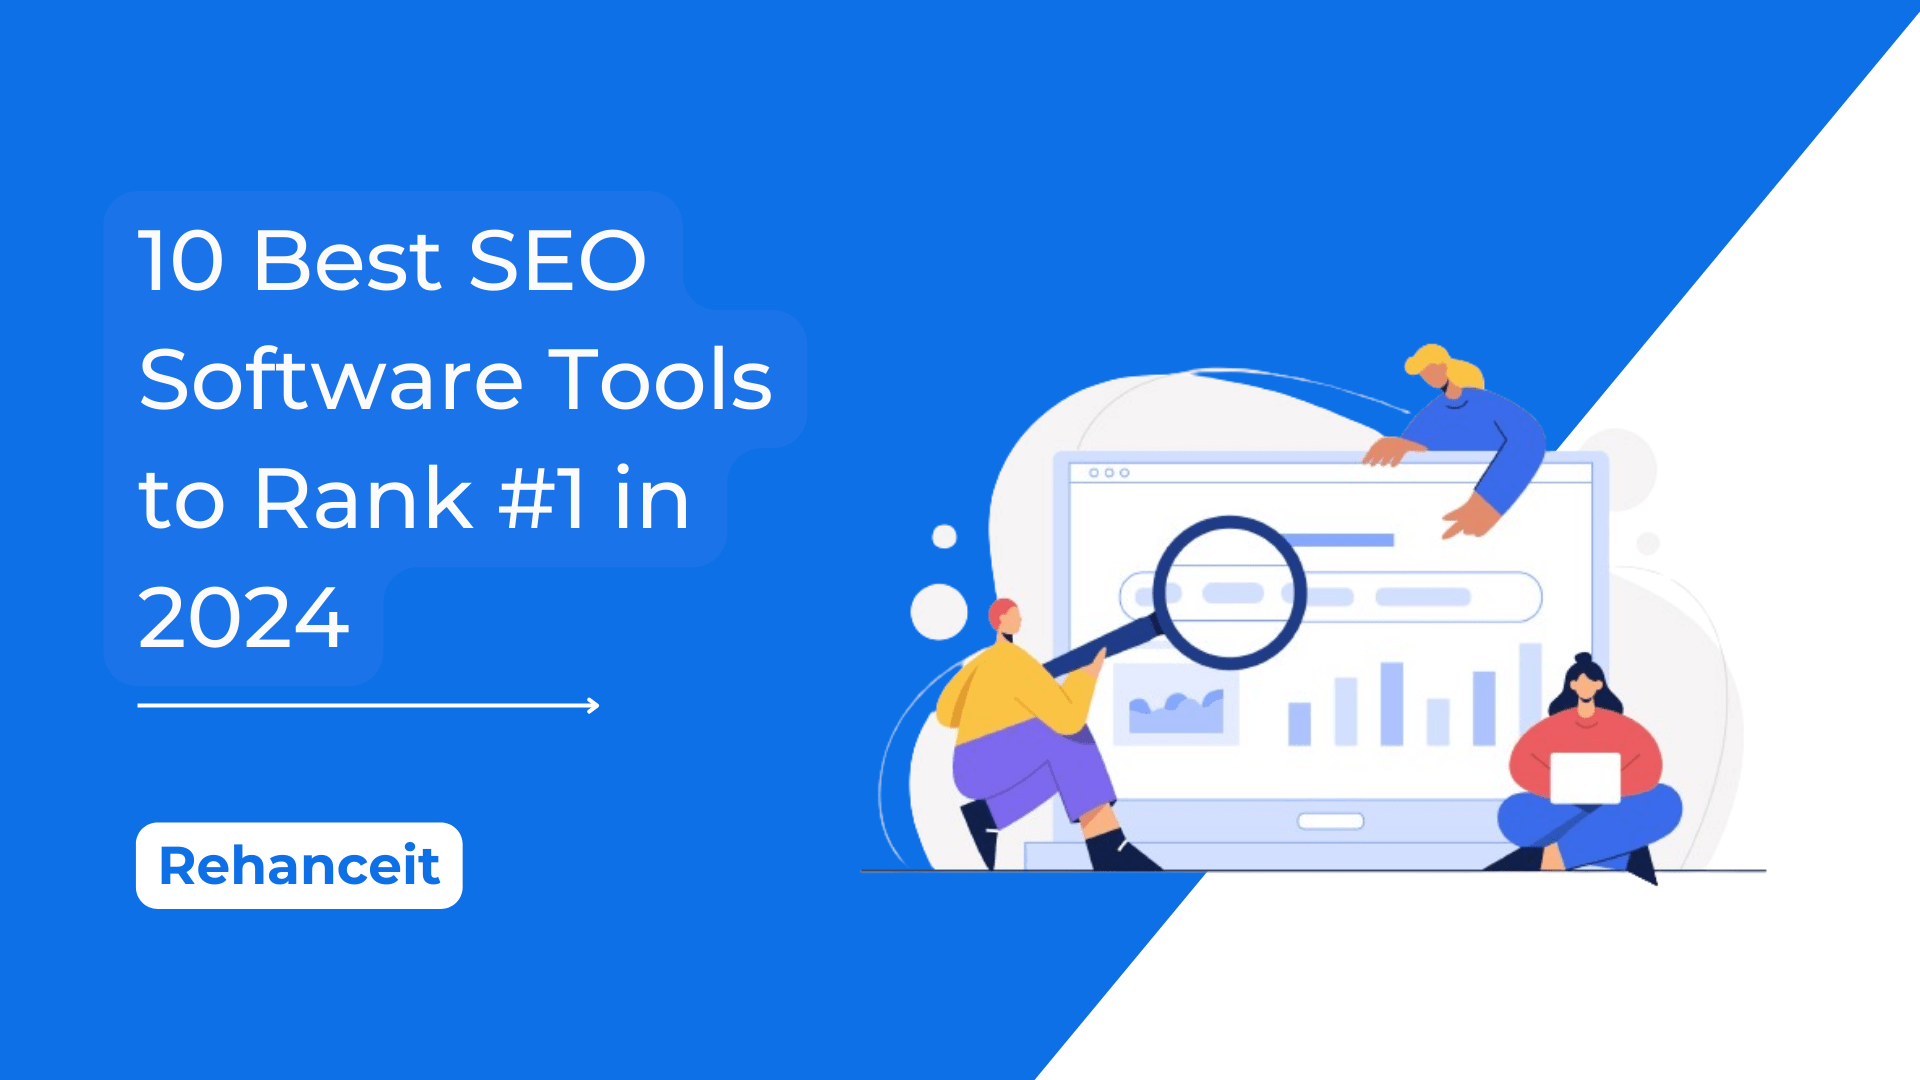 You are currently viewing 10 Best SEO Software Tools to Rank #1 in 2024